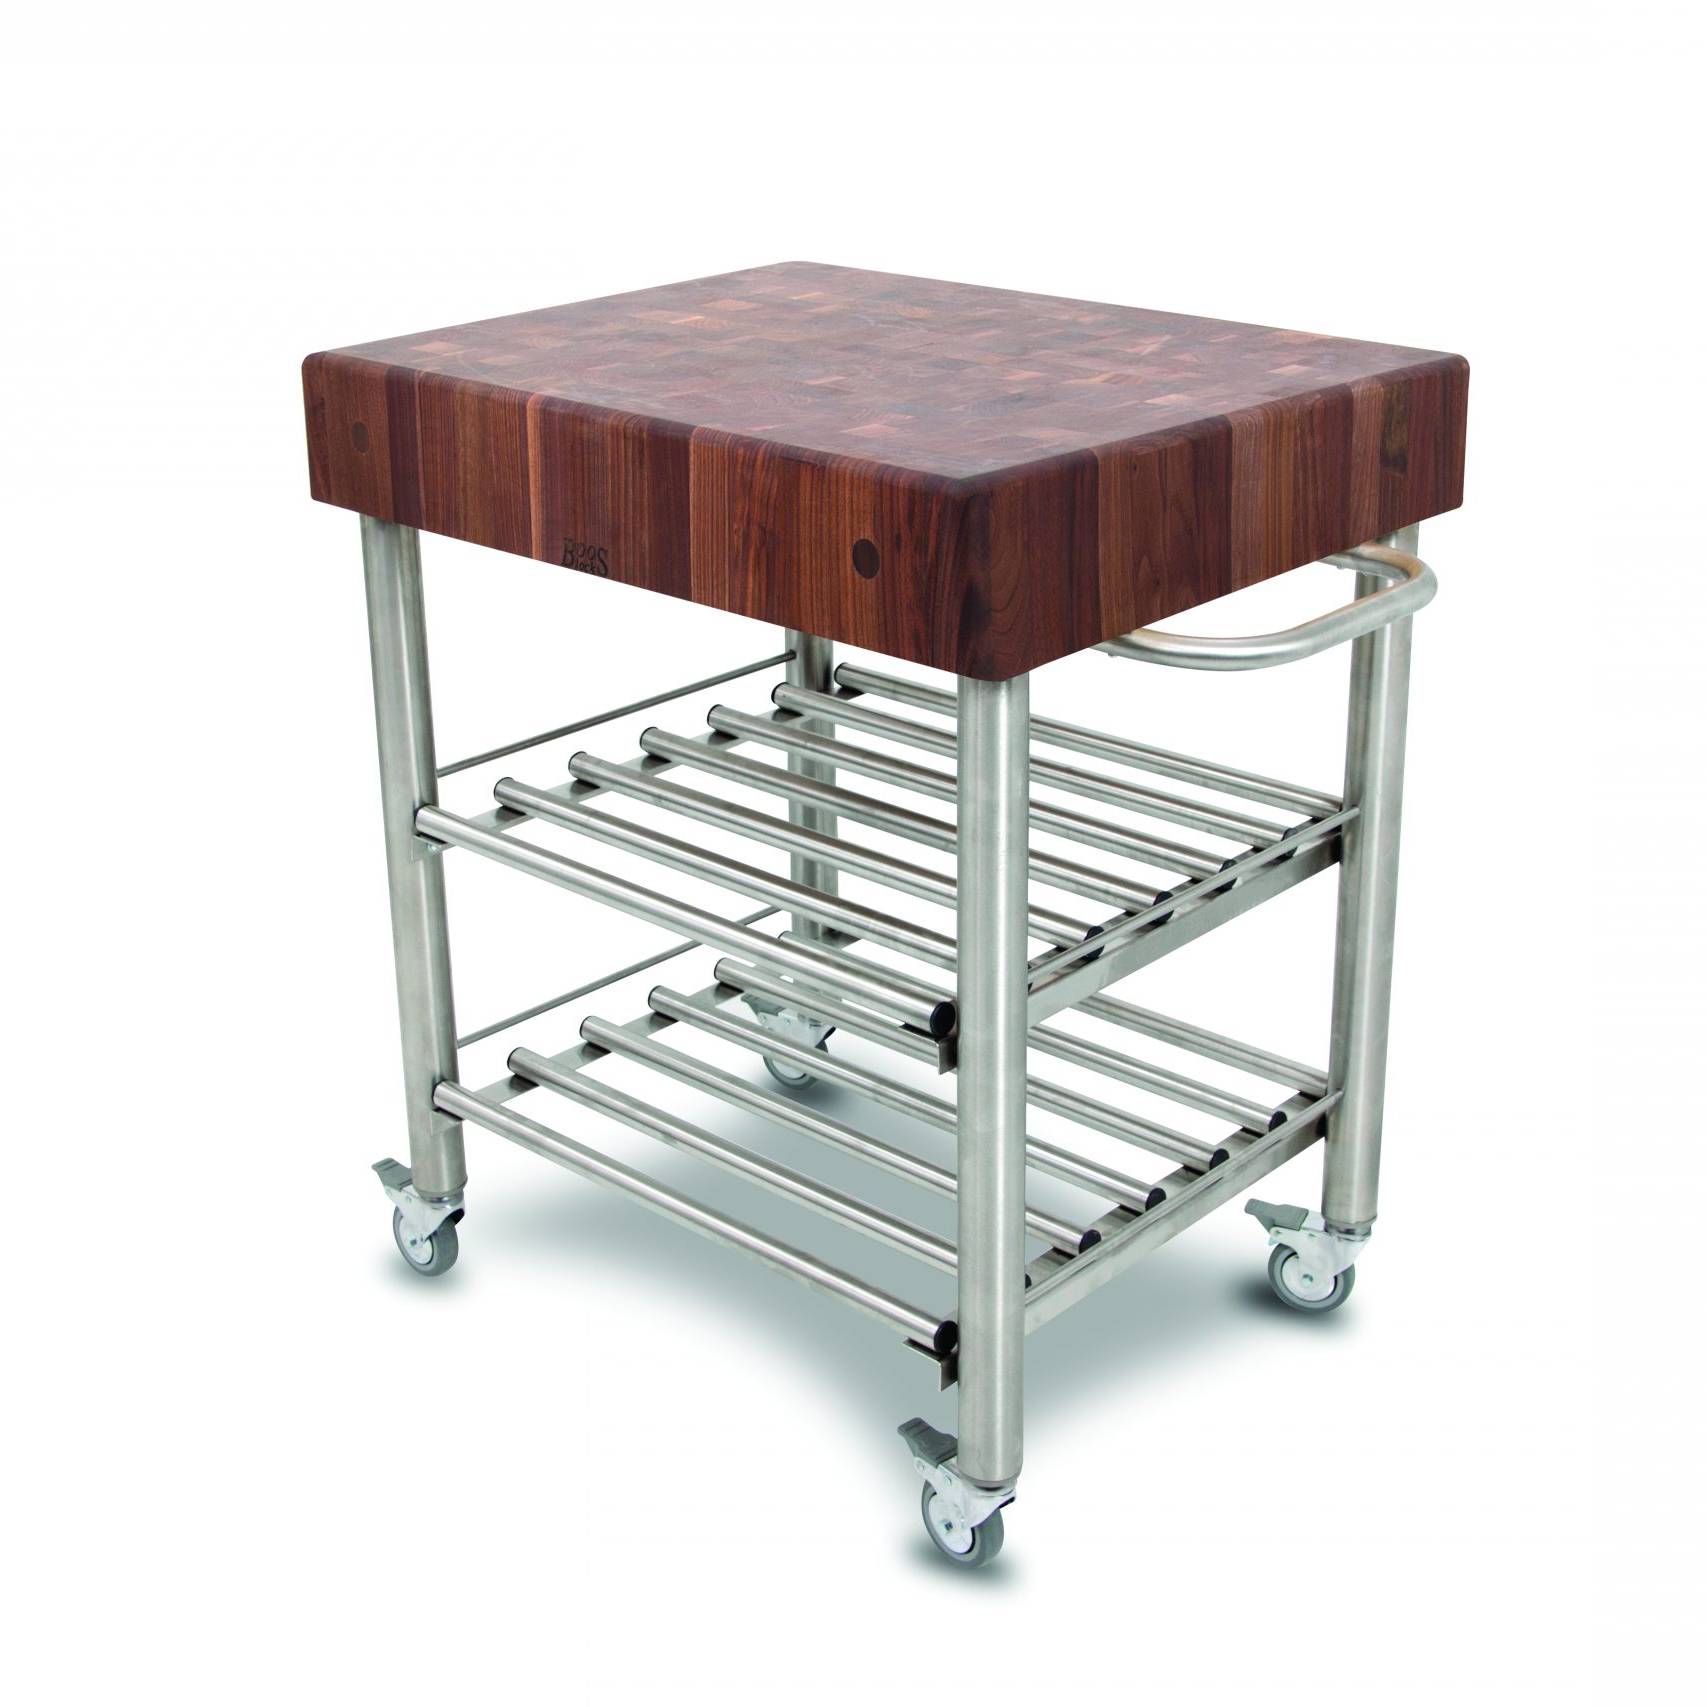 Cucina Kitchen &amp; Wine serving cart with Black Walnut end grain countertop and stainless steel base with 2 shelves, towel rack; lockable casters; 21